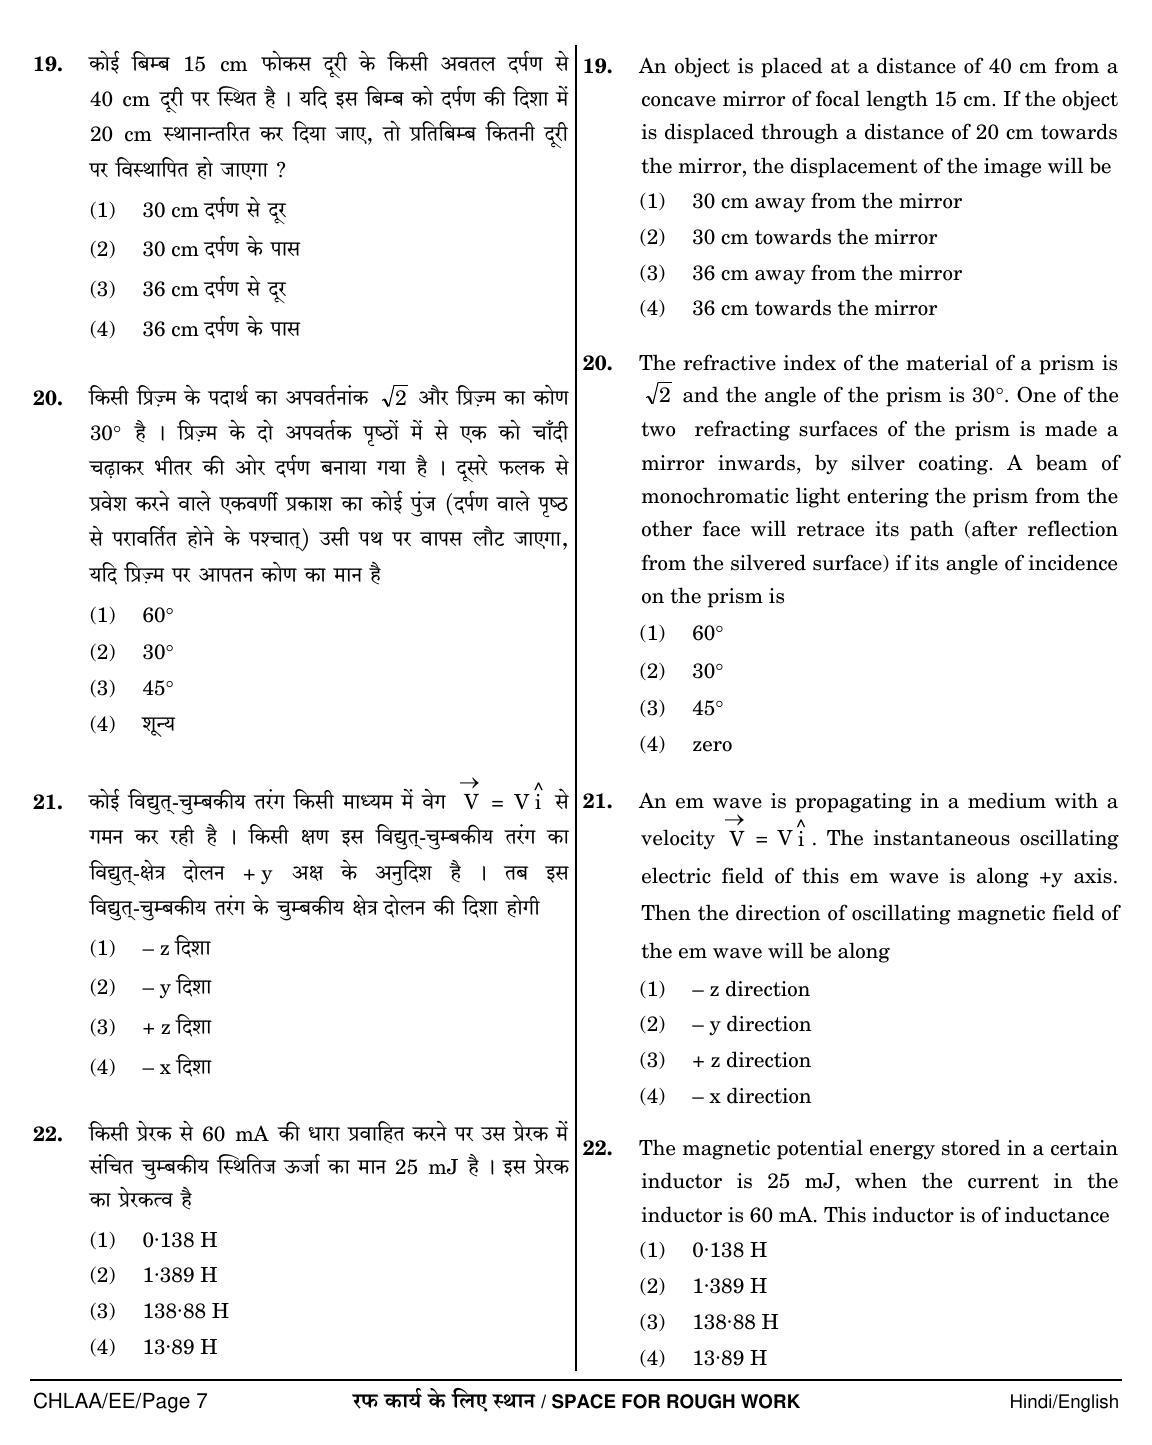 NEET Hindi EE 2018 Question Paper - Page 7